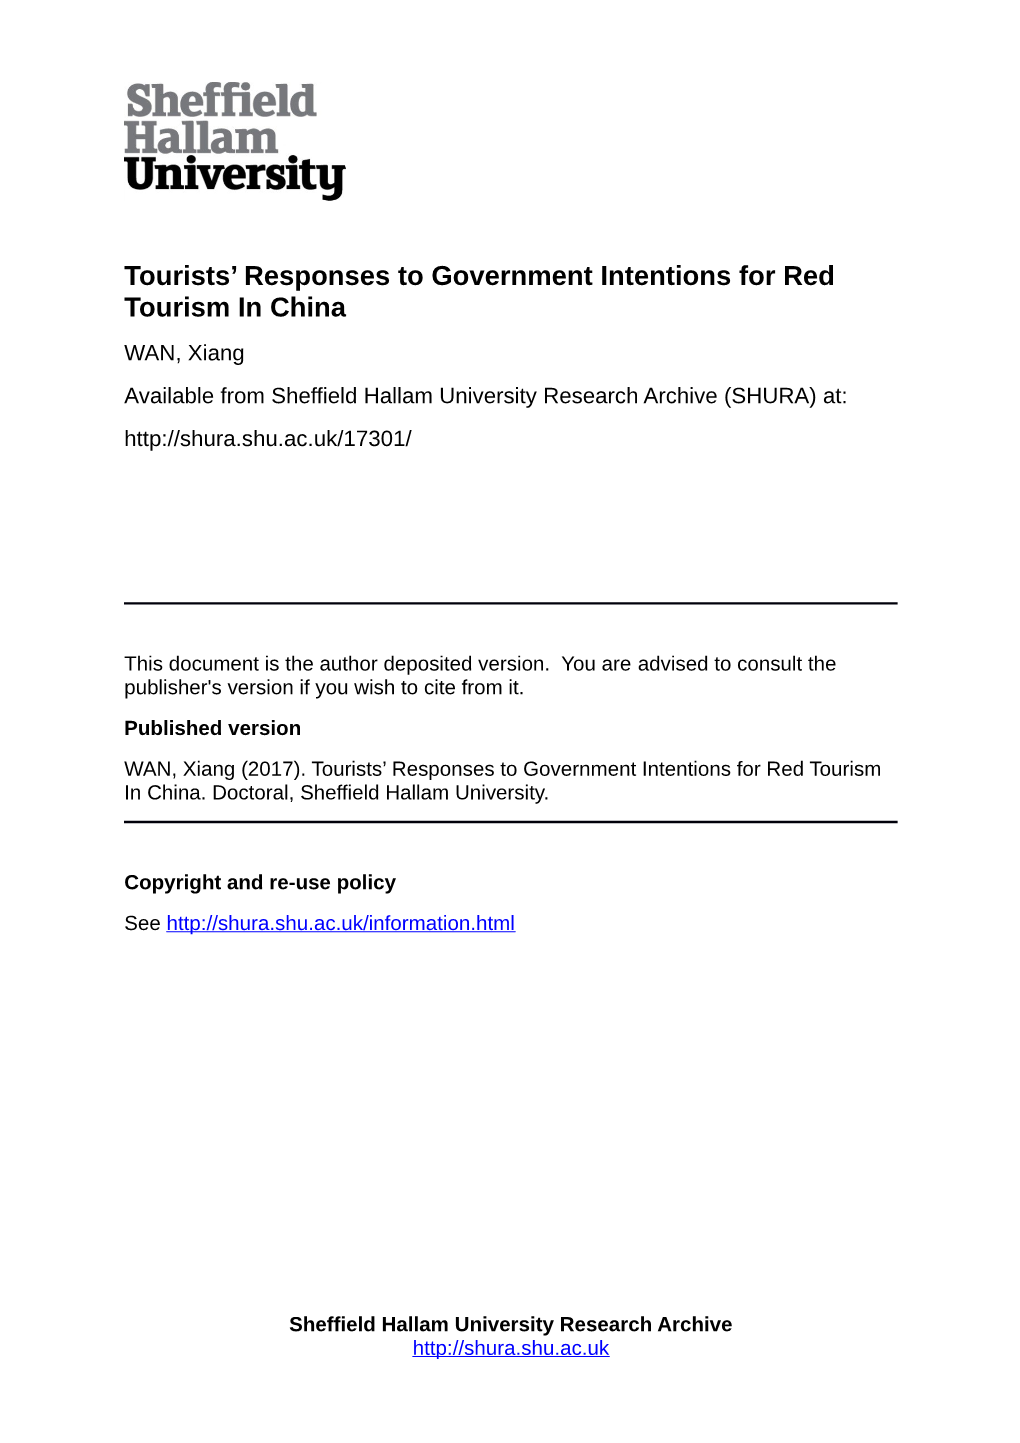 Tourists' Responses to Government Intentions for Red Tourism in China'